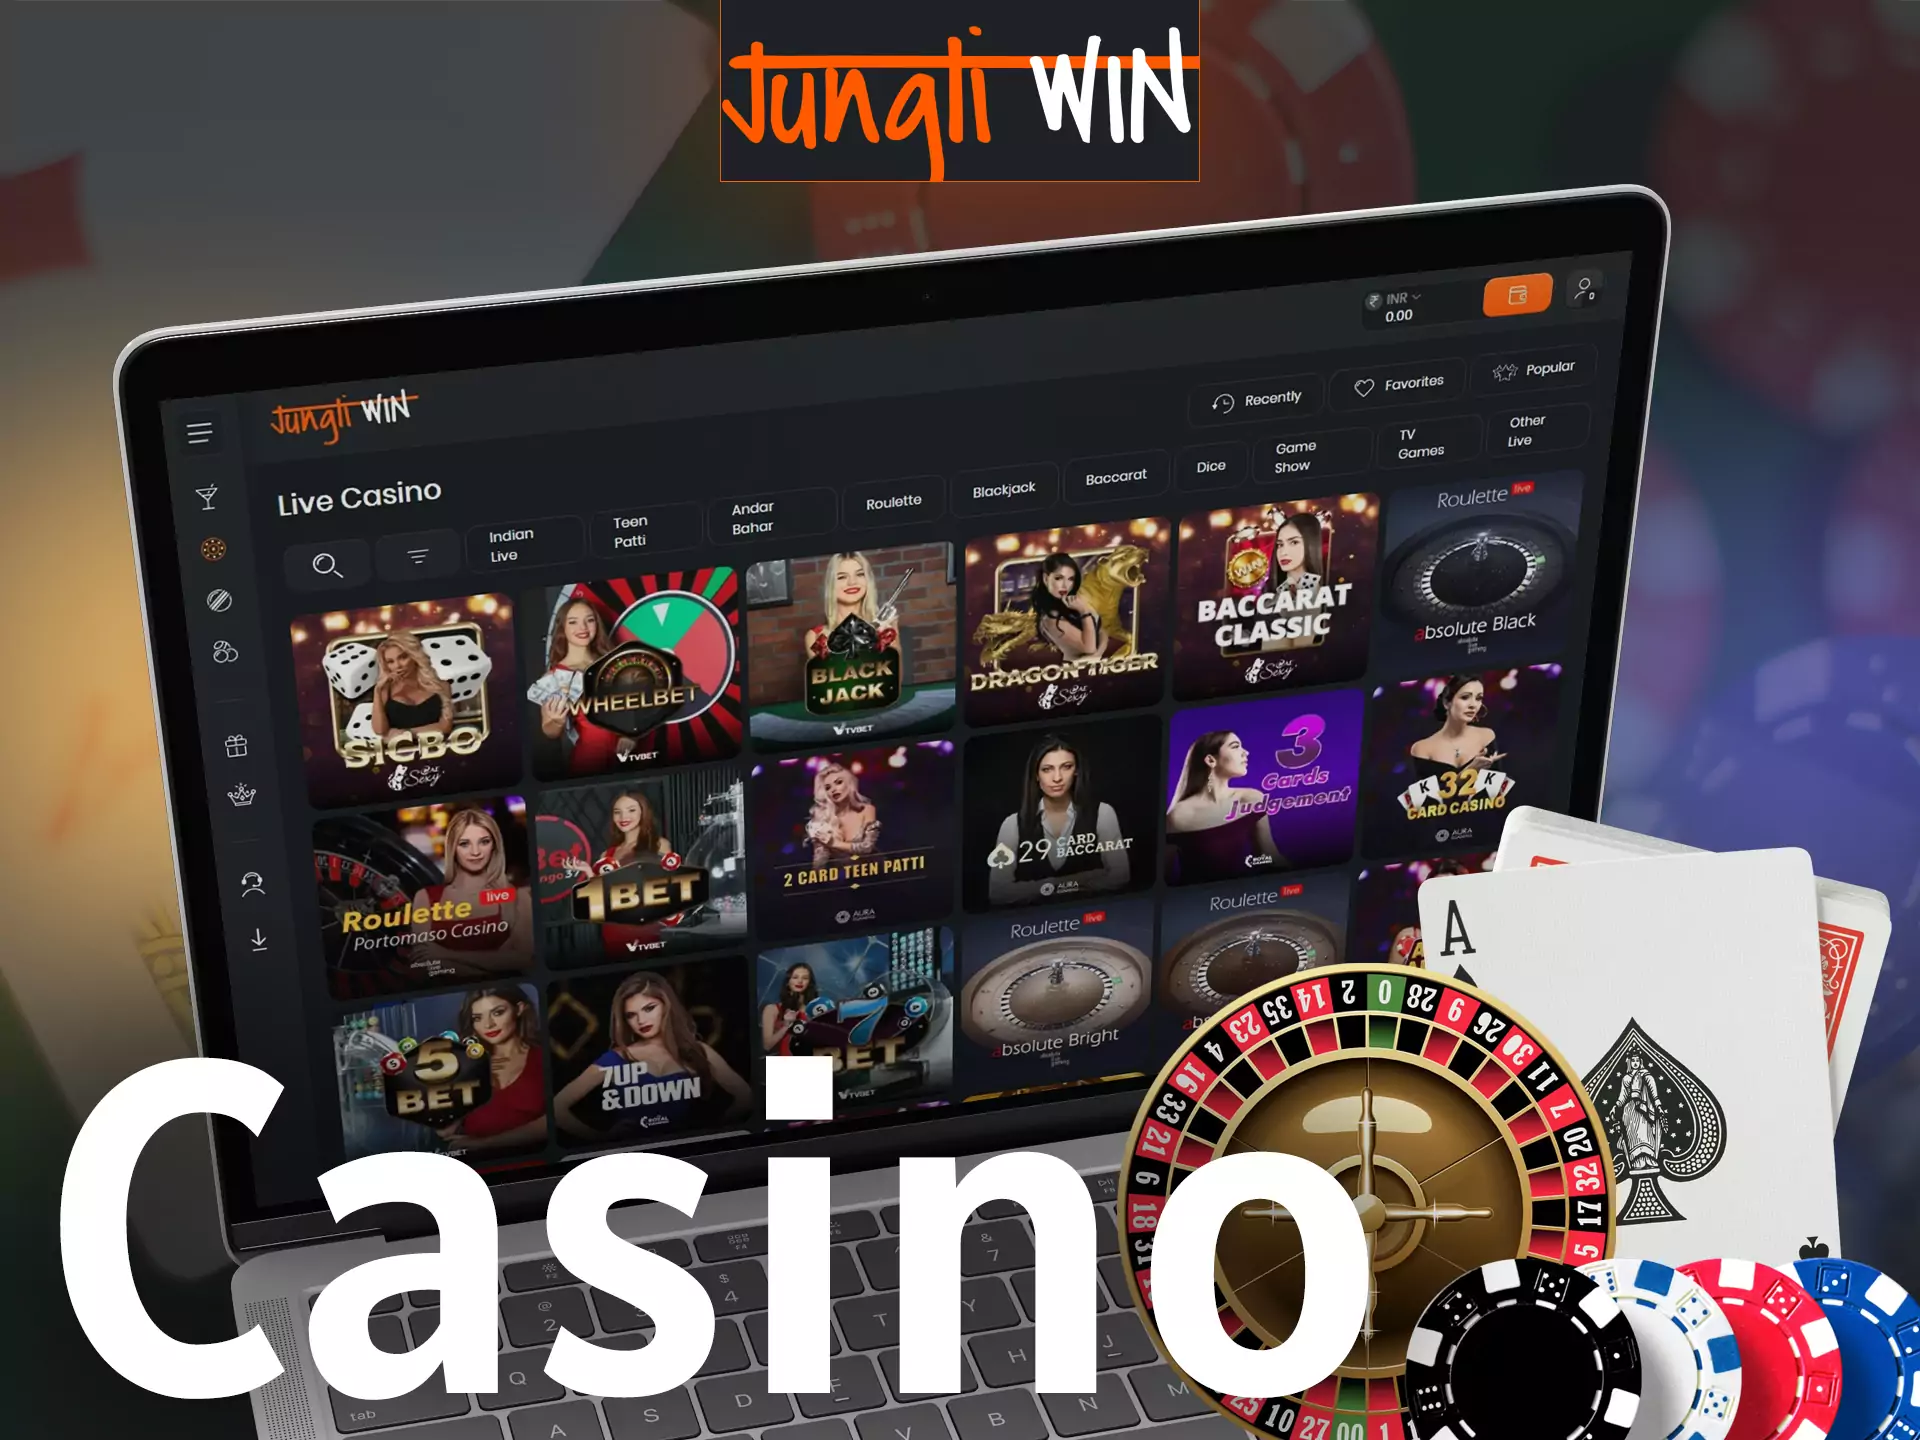 In Jungliwin, you can have a good time at the casino.